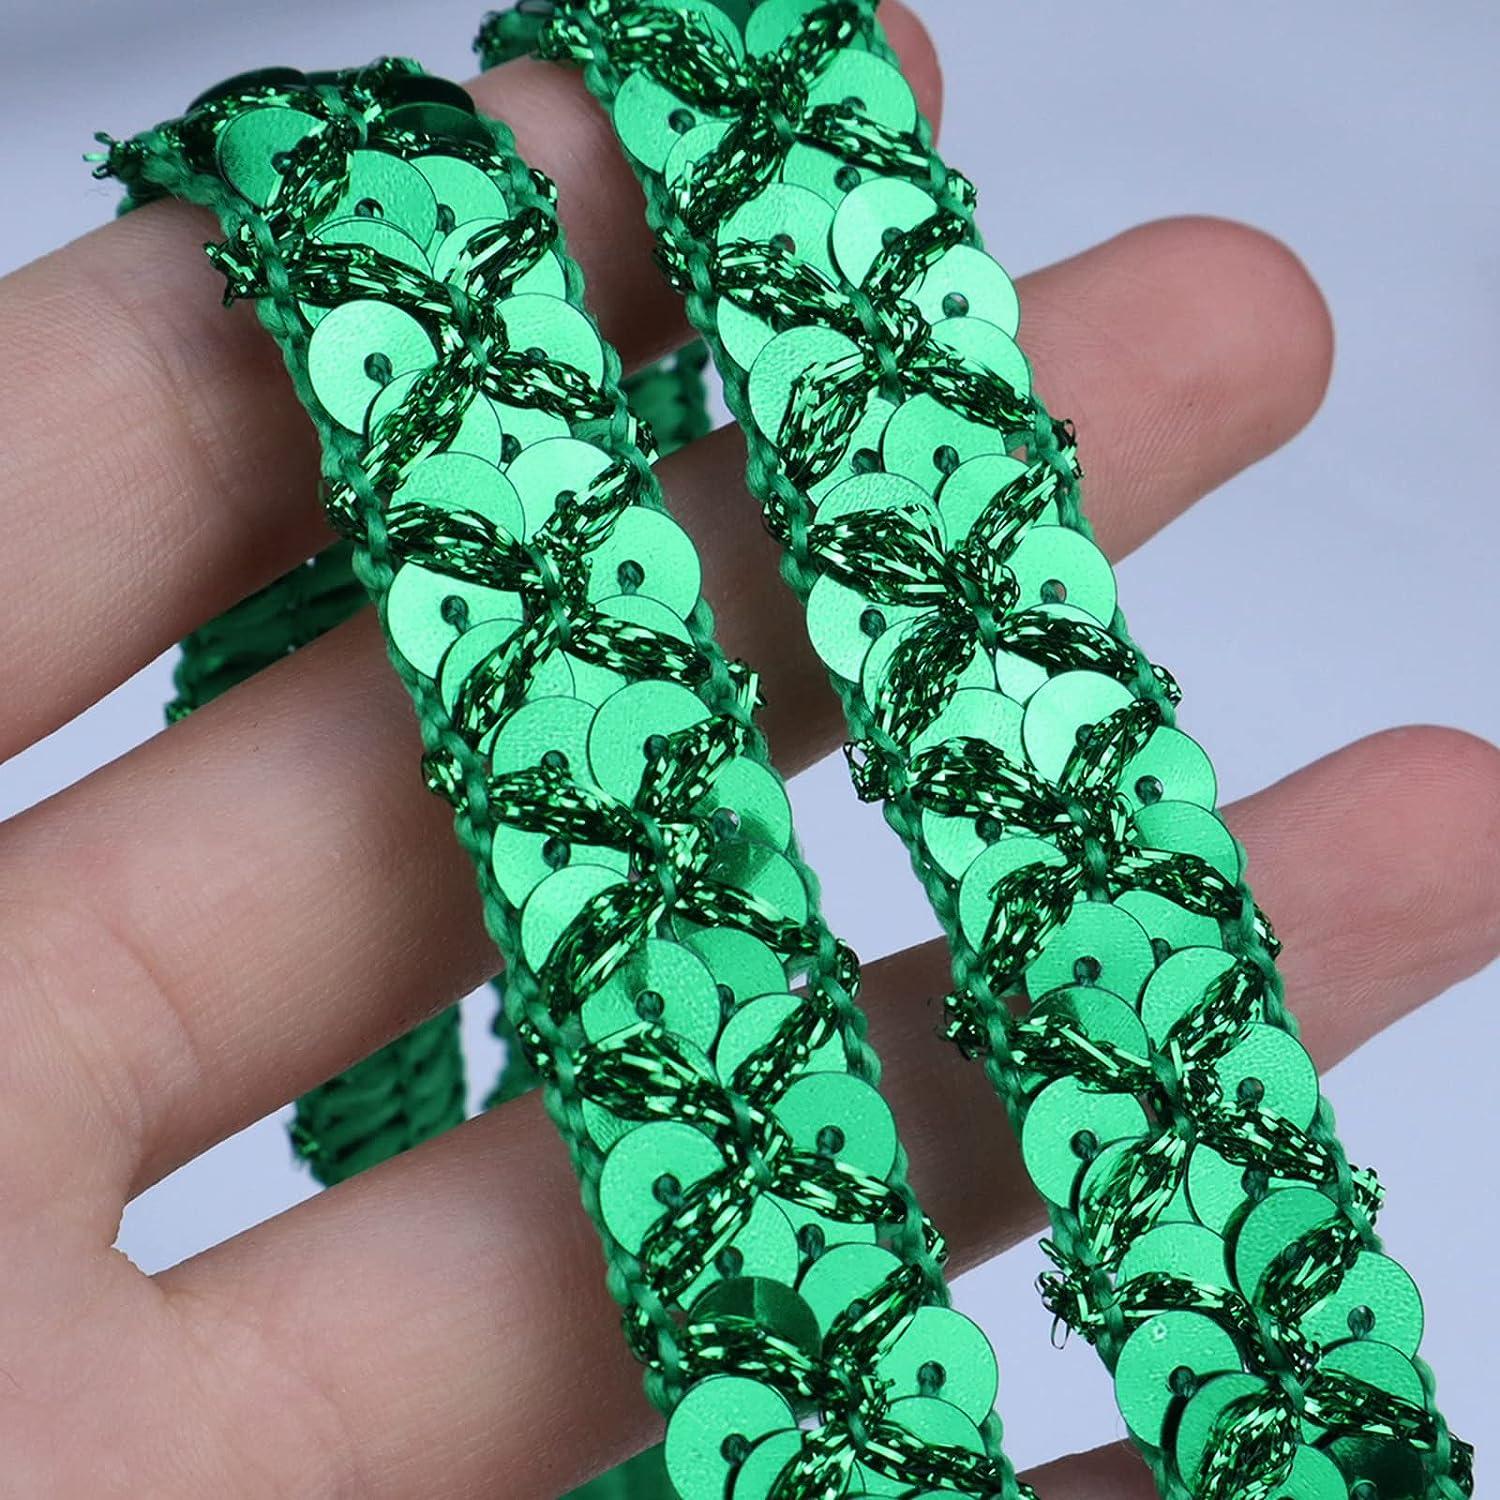 SEWDIYTR Sequin Lace Ribbon Metallic Glitter Braid Trim for Sewing  Christmas Home Decoration 10 Yards (Green)